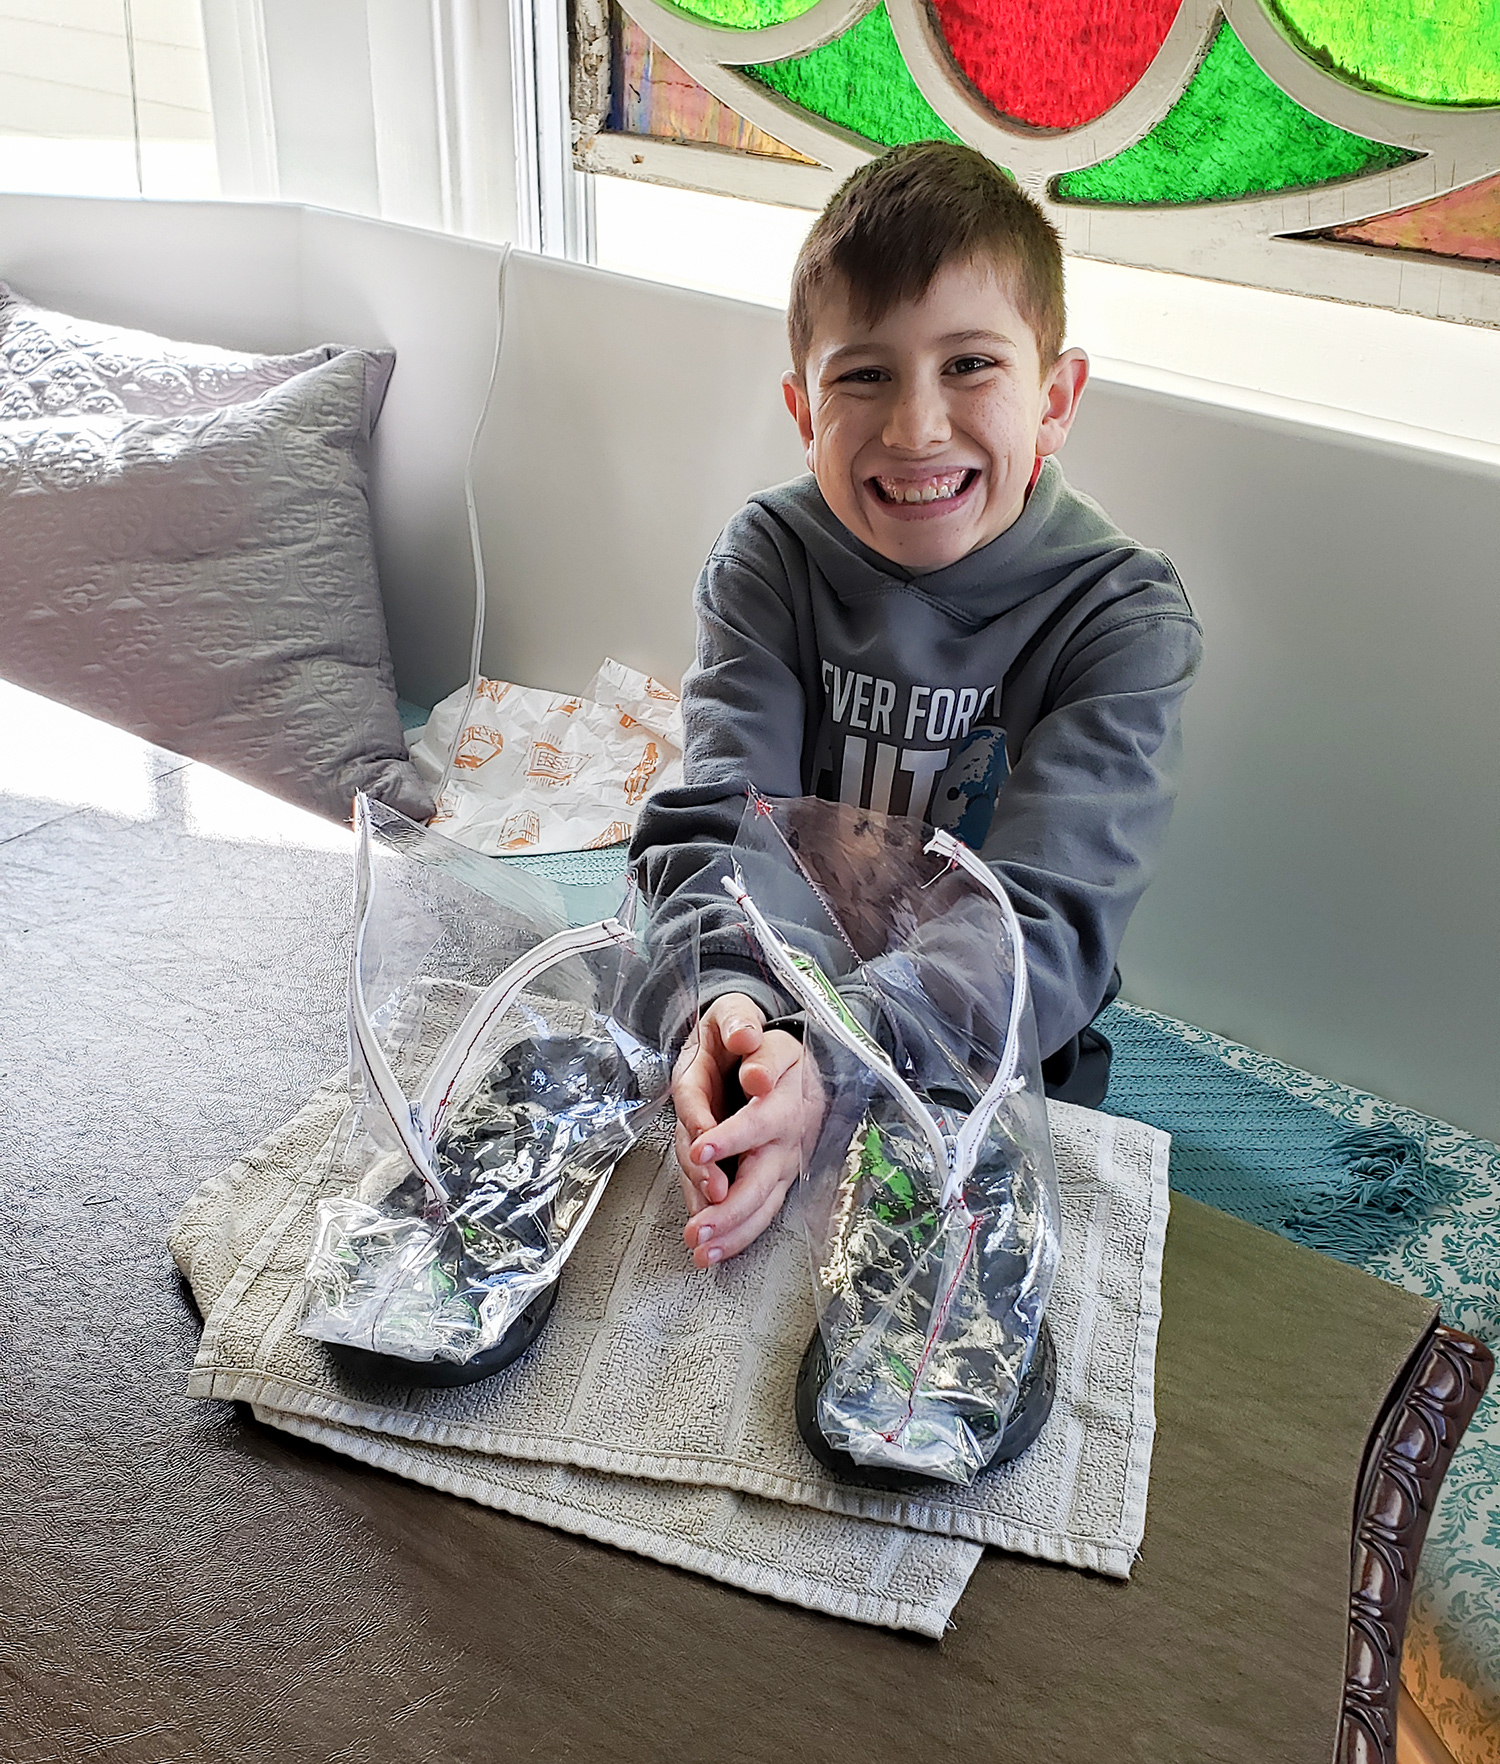 Young boy sitting down at a table with his invention, clear vinyl shoe protectors, displayed.